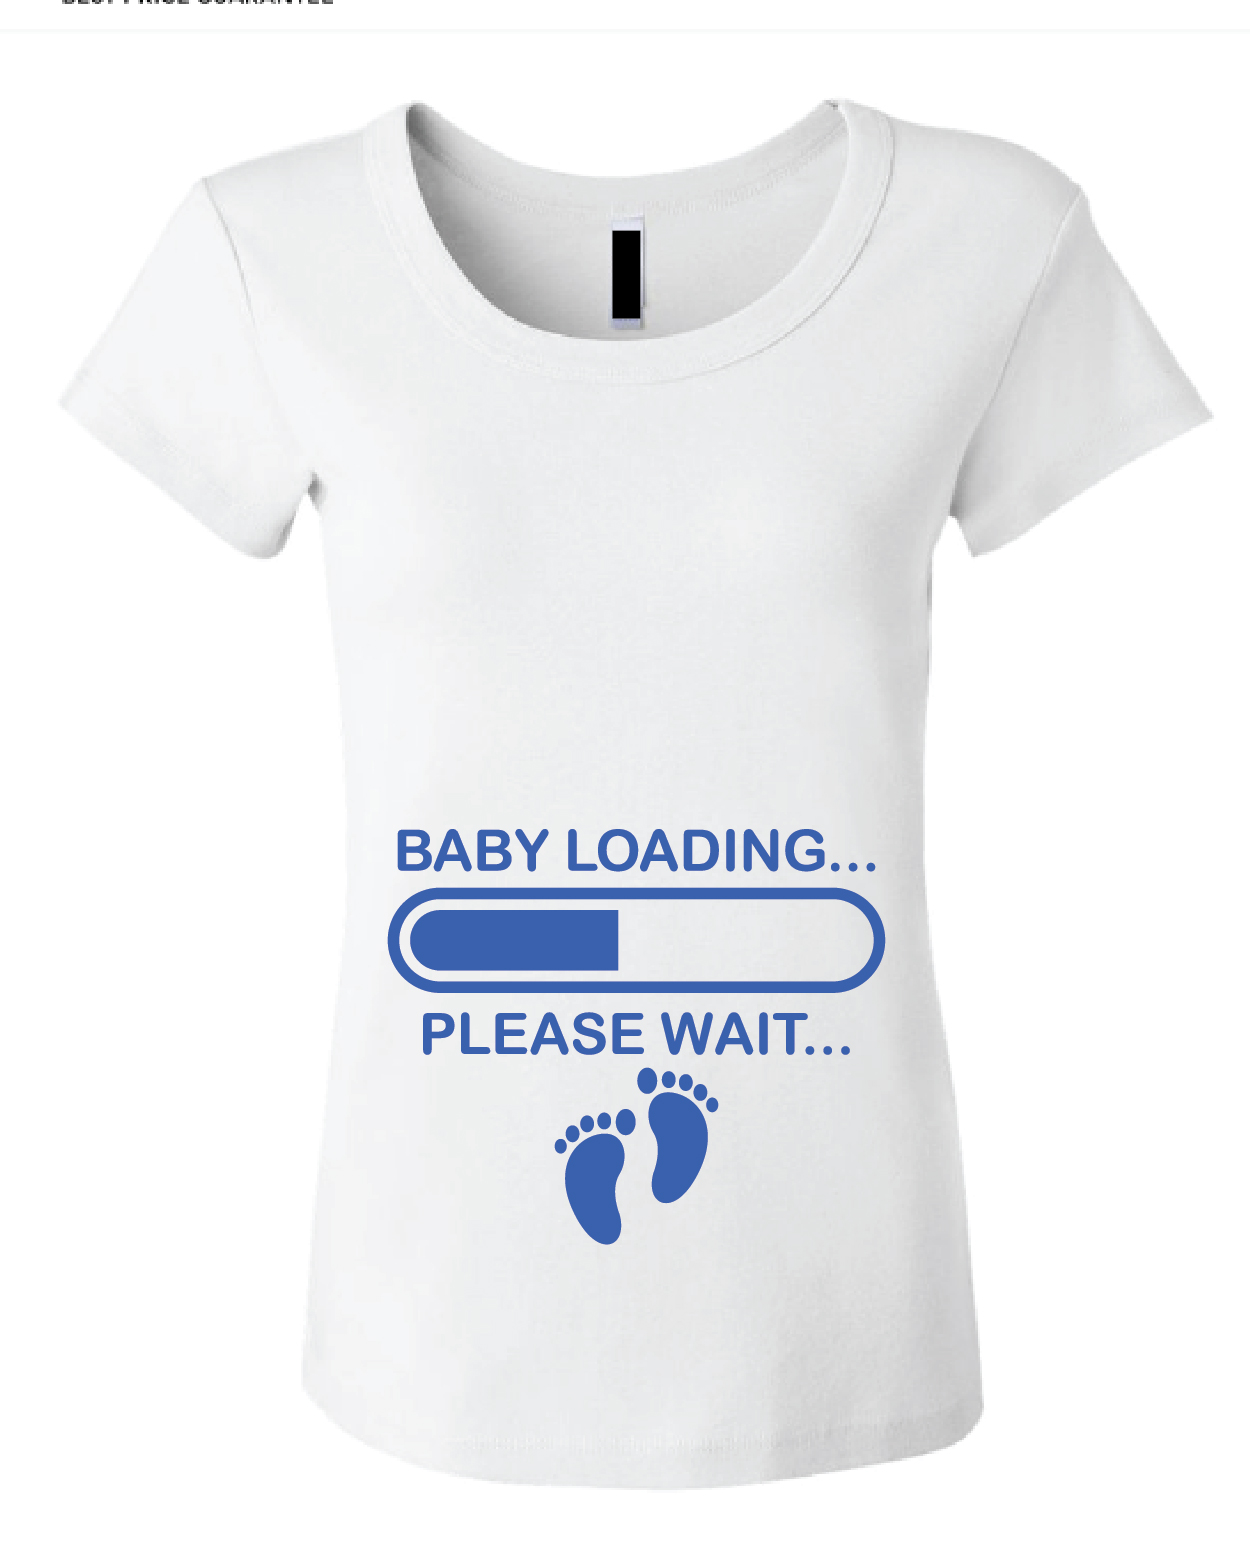 Download Baby Loading Pregnant Tee Shirt Design, SVG, DXF, EPS Vector files for use with Cricut or ...